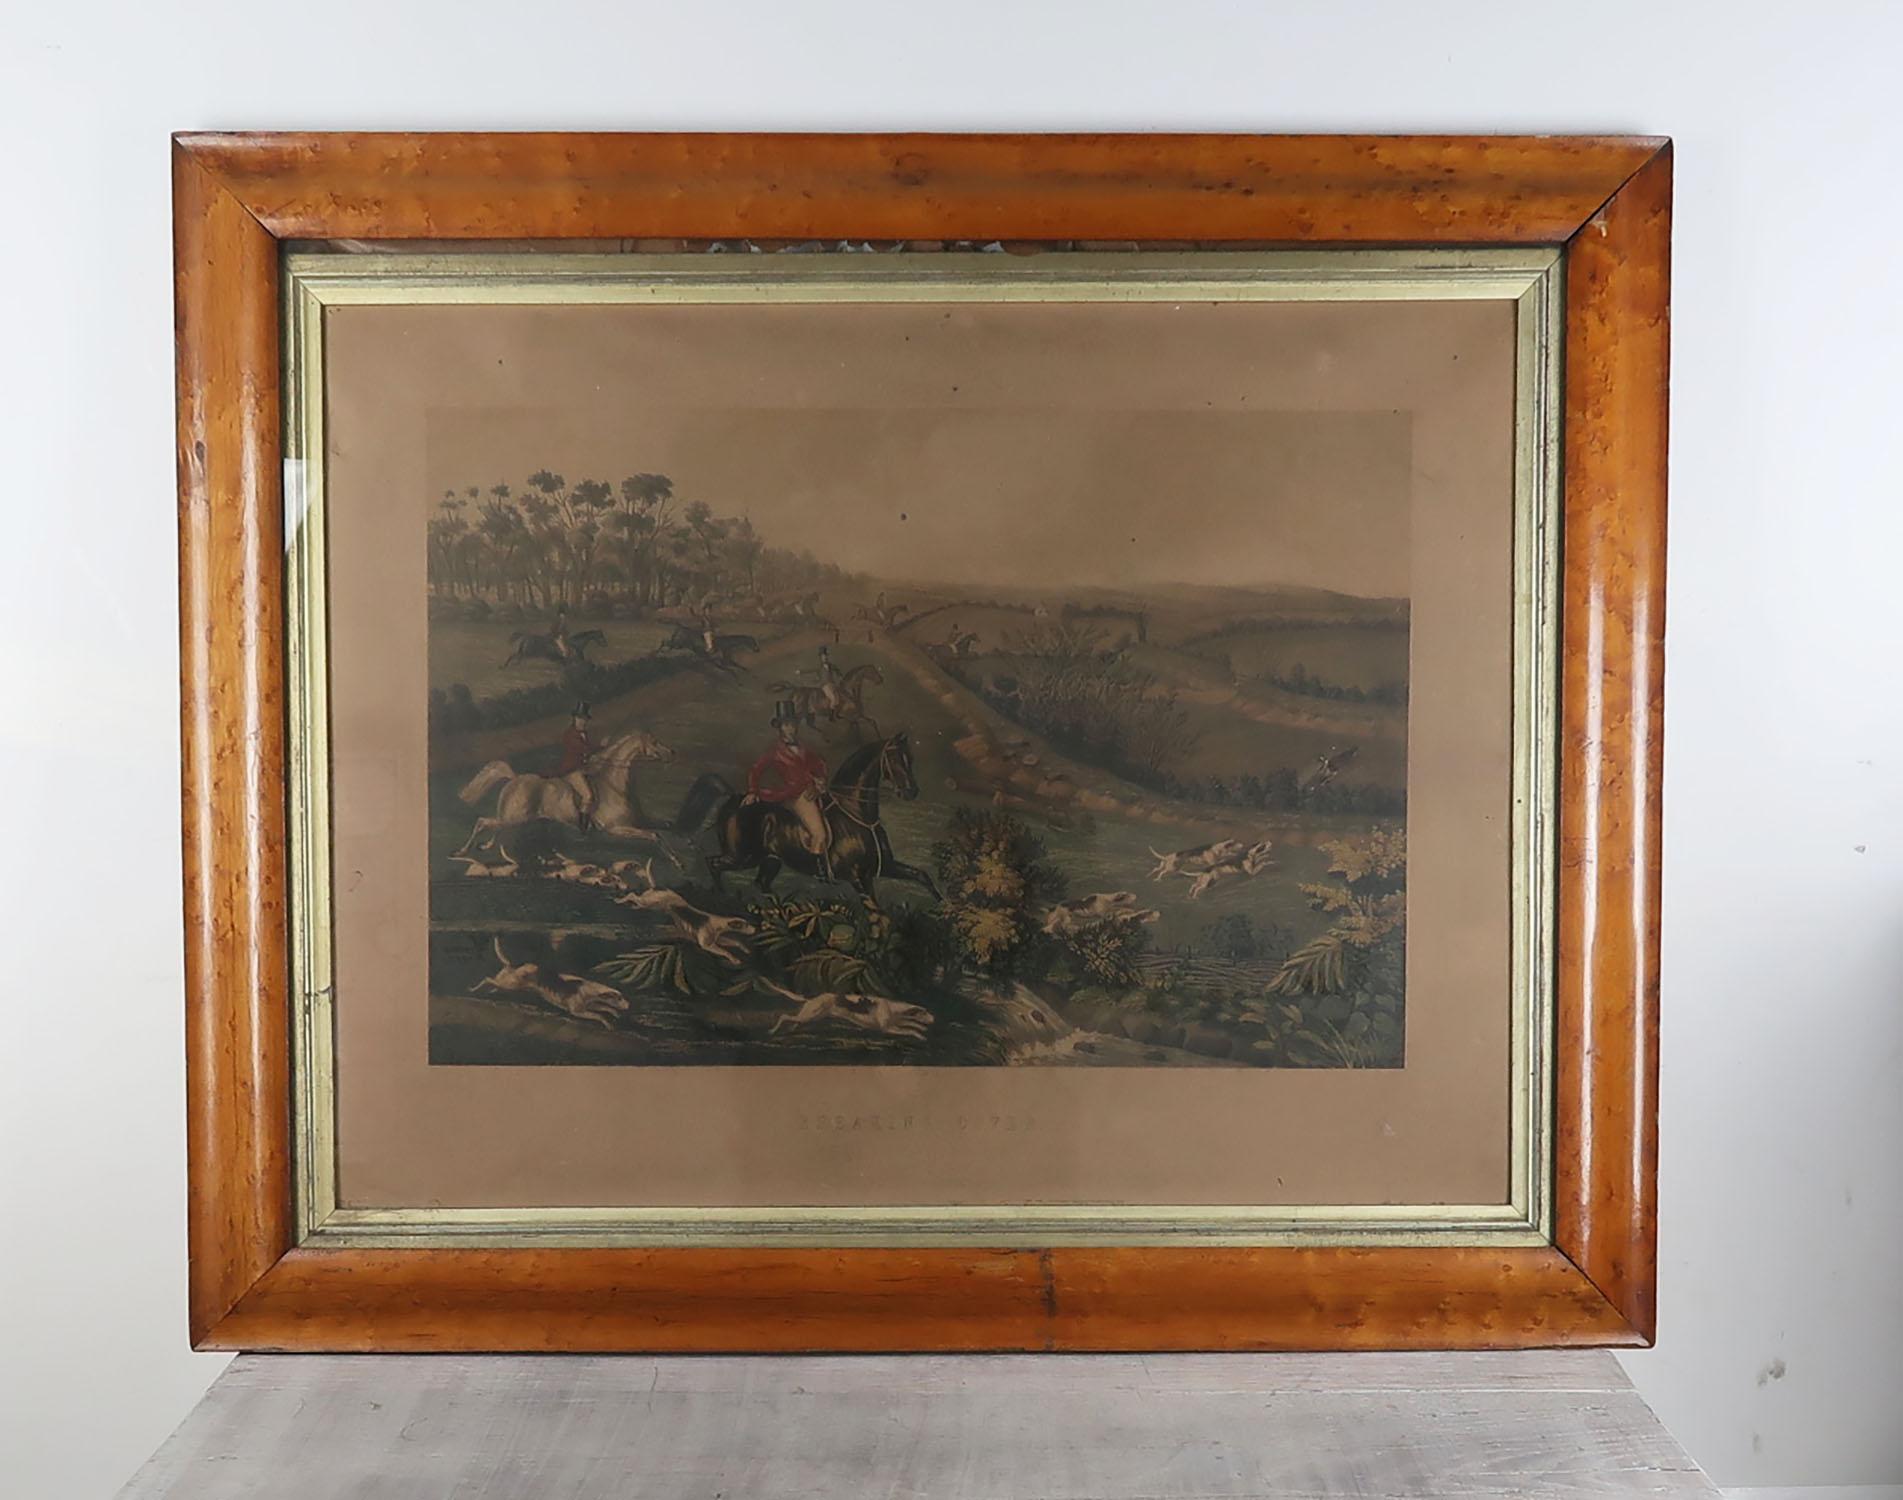 Amazing set of 4 sporting prints. All fox hunting related.

Country House condition

Wonderful muted colors.

In the original birds eye maple frames.

Lithographs with original color.

Published by F.Sala & Co., Berlin, Germany.

All